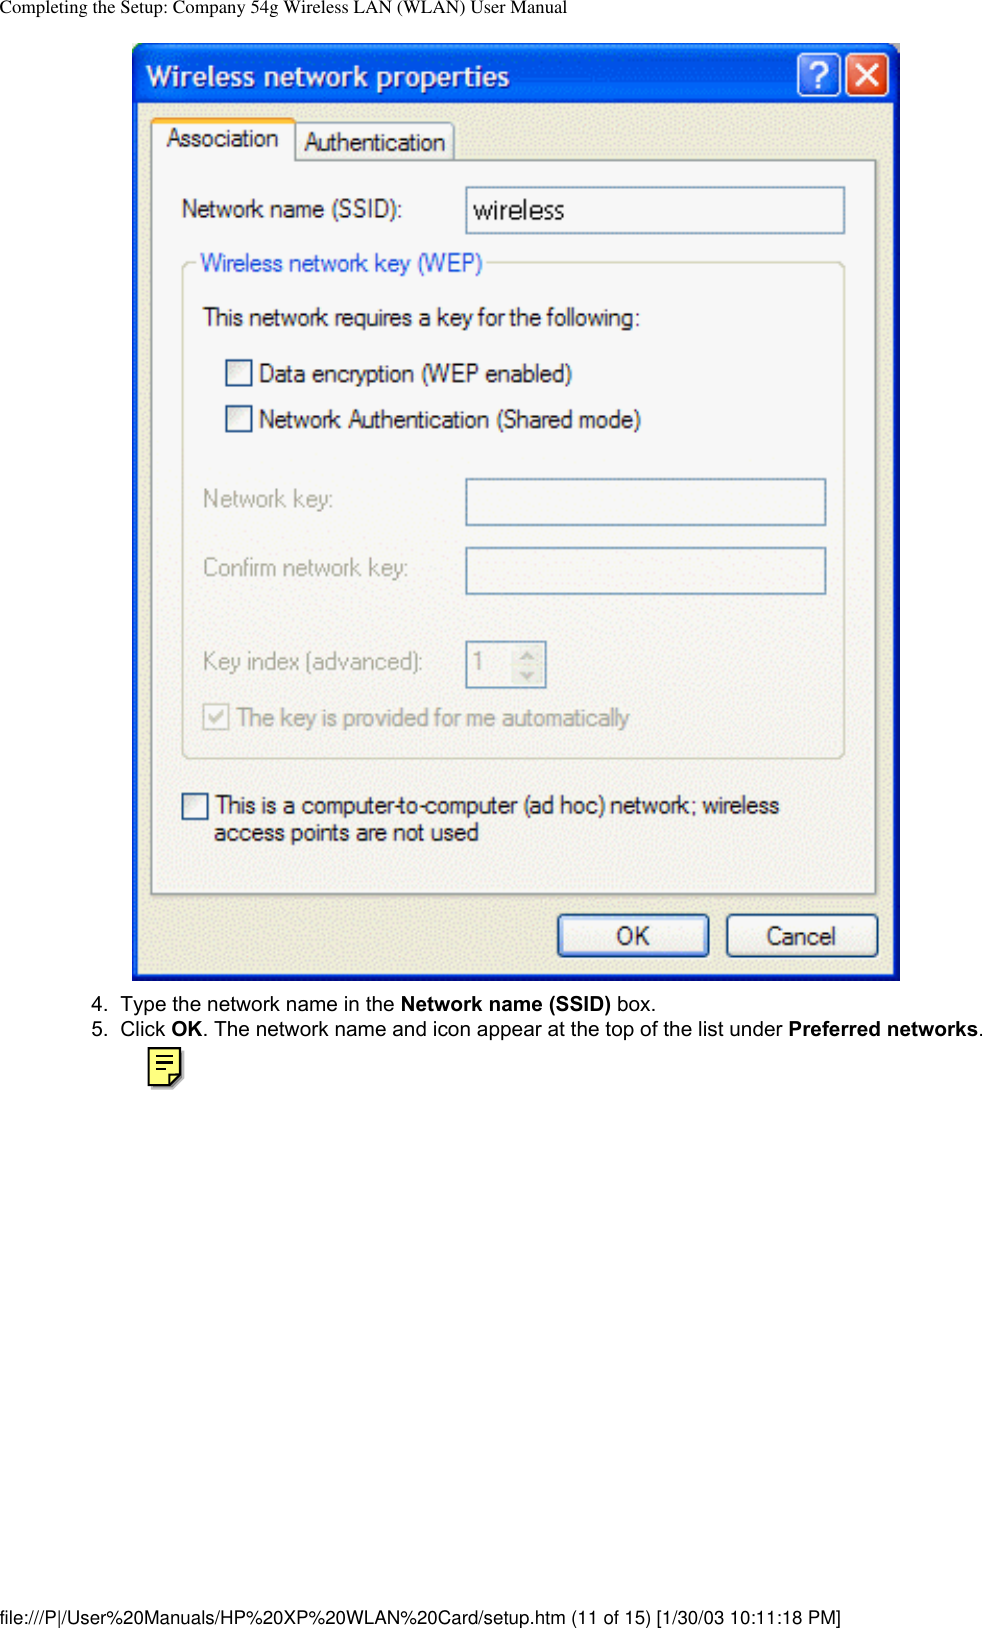 Completing the Setup: Company 54g Wireless LAN (WLAN) User Manual4.  Type the network name in the Network name (SSID) box.5.  Click OK. The network name and icon appear at the top of the list under Preferred networks. file:///P|/User%20Manuals/HP%20XP%20WLAN%20Card/setup.htm (11 of 15) [1/30/03 10:11:18 PM]